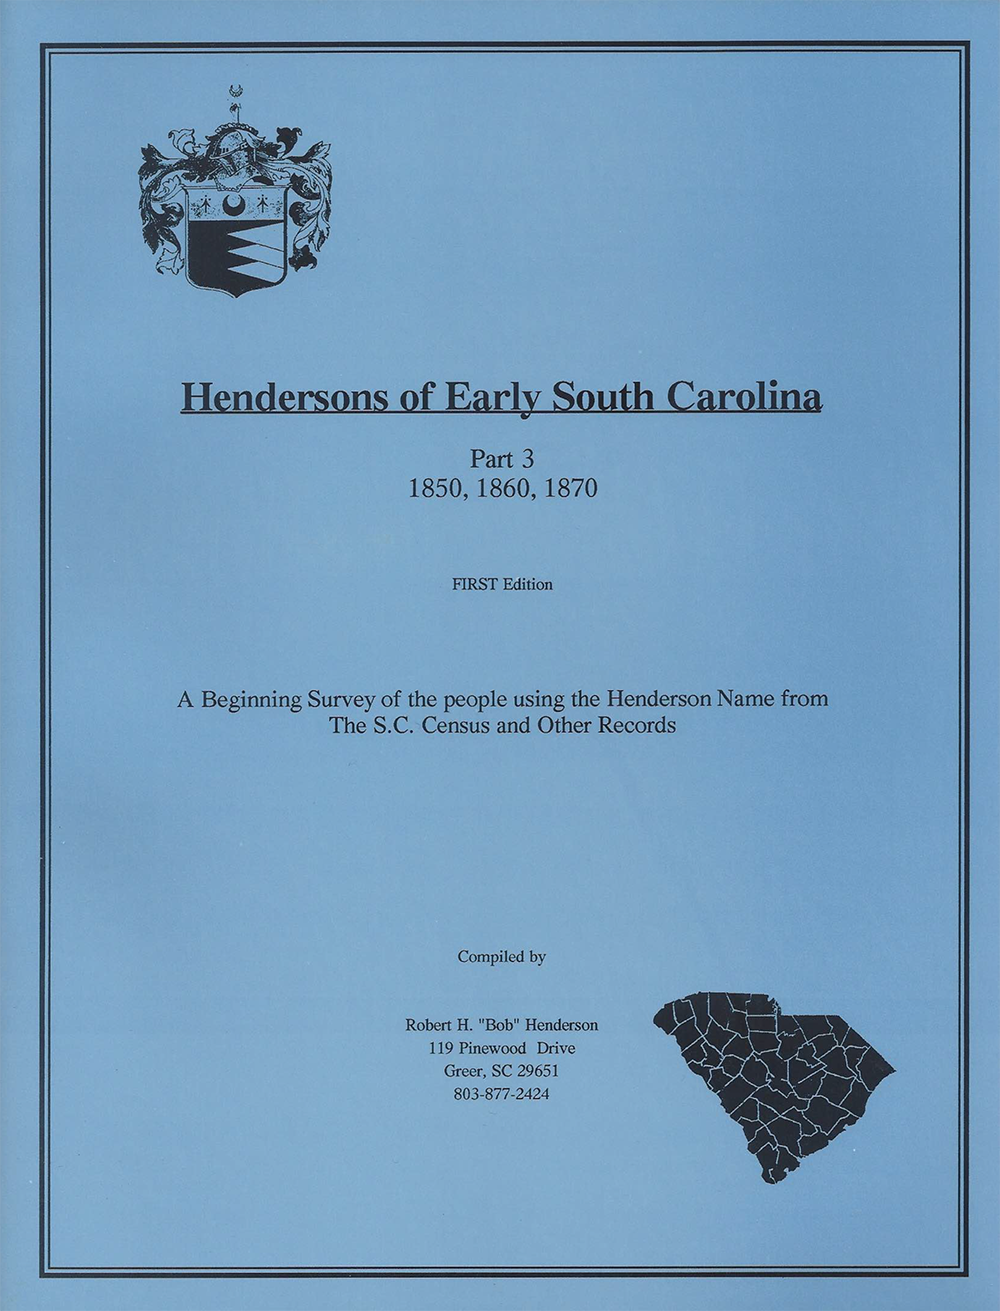 Hendersons of Early SC – Part 3 (1950-1870) by Robert H. Henderson, Sr.